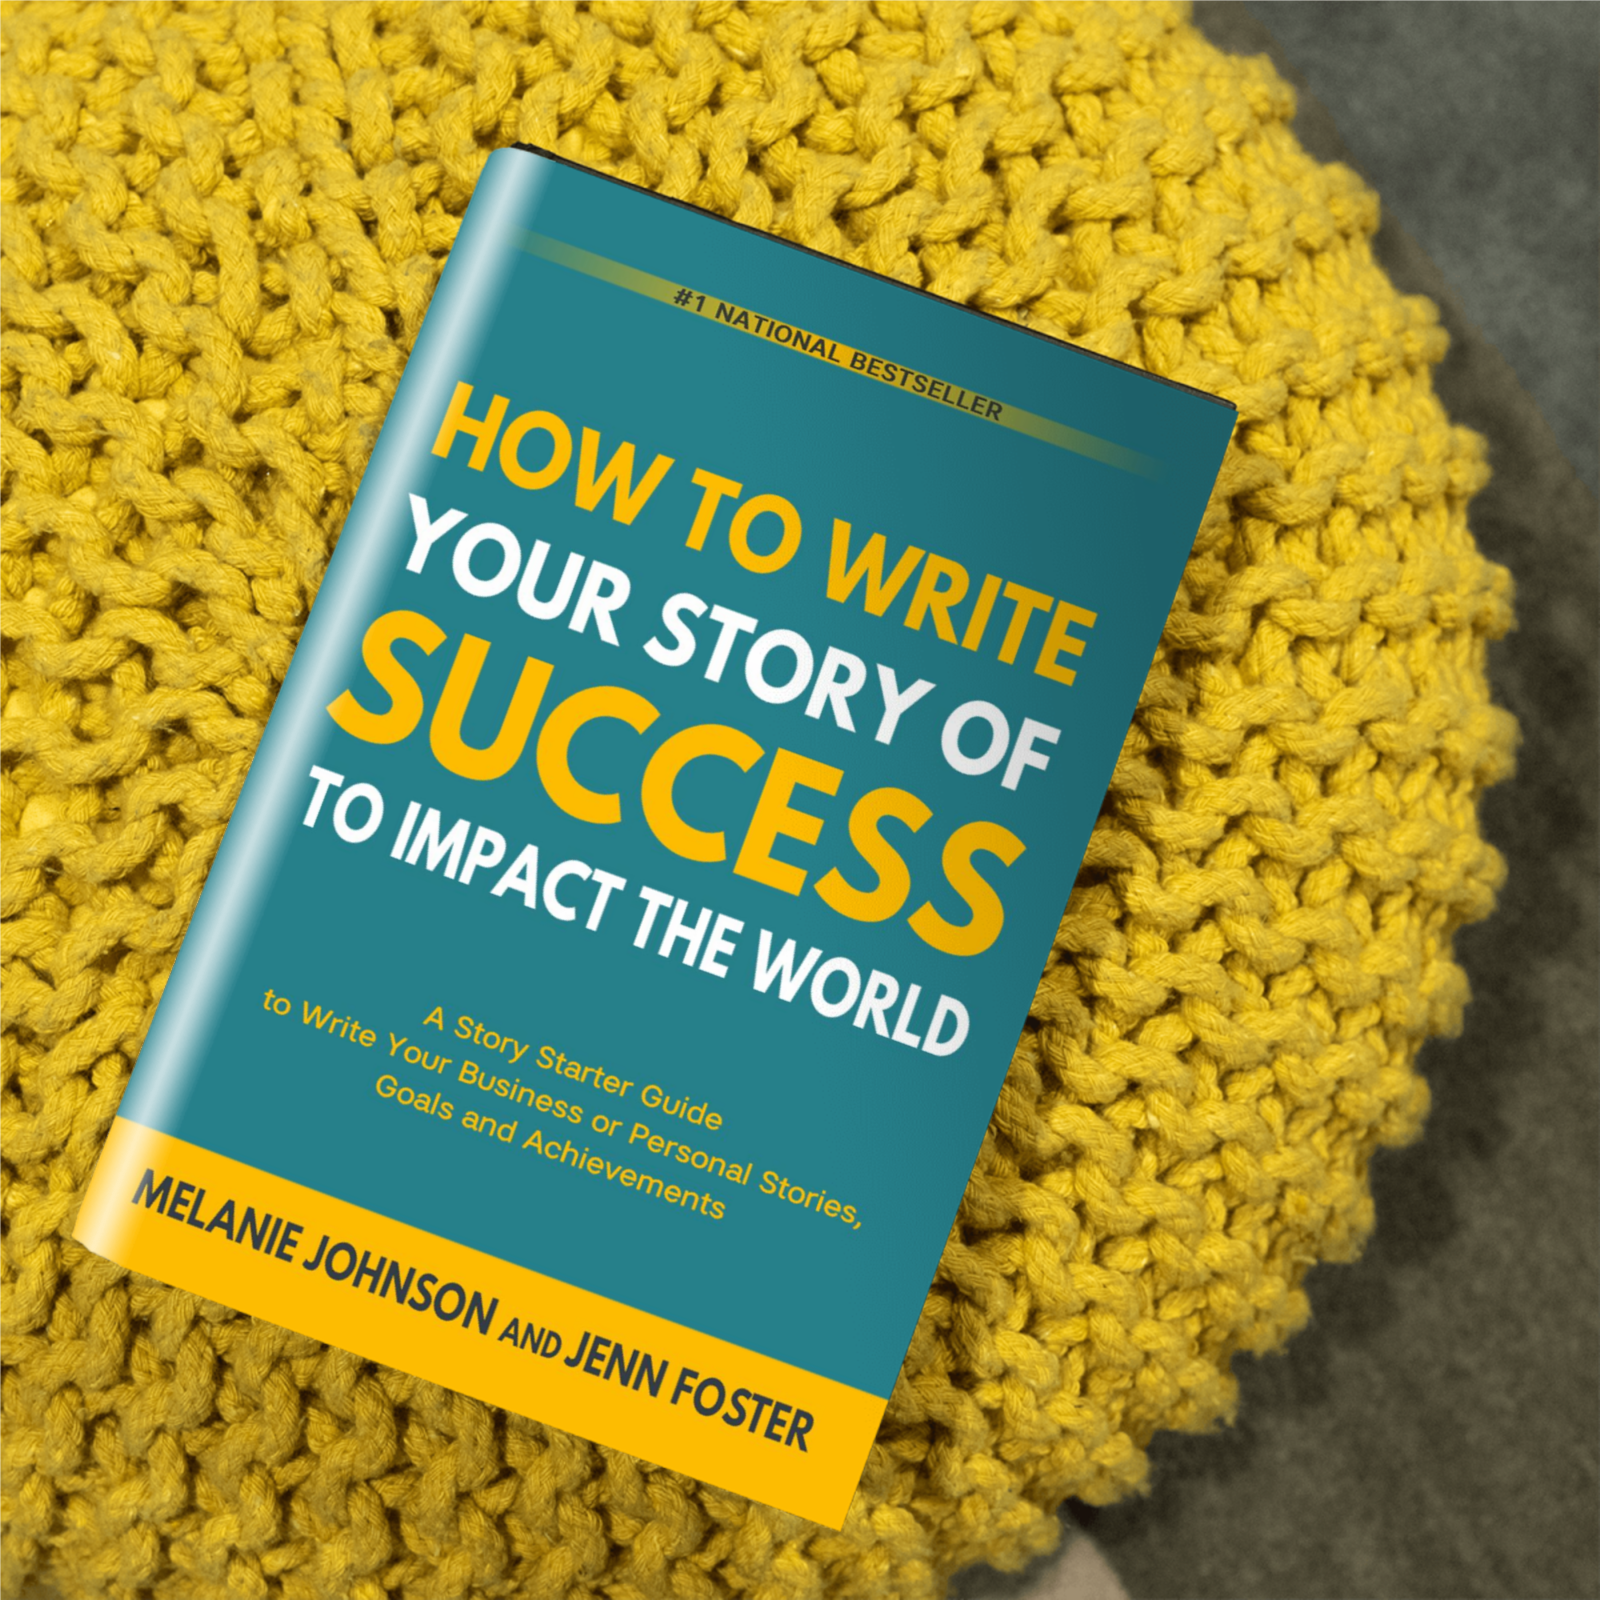 How To Write Your Story of Success to Impact the World: A Story Starter Guide to Write Your Business or Personal Stories, Goals and Achievements 